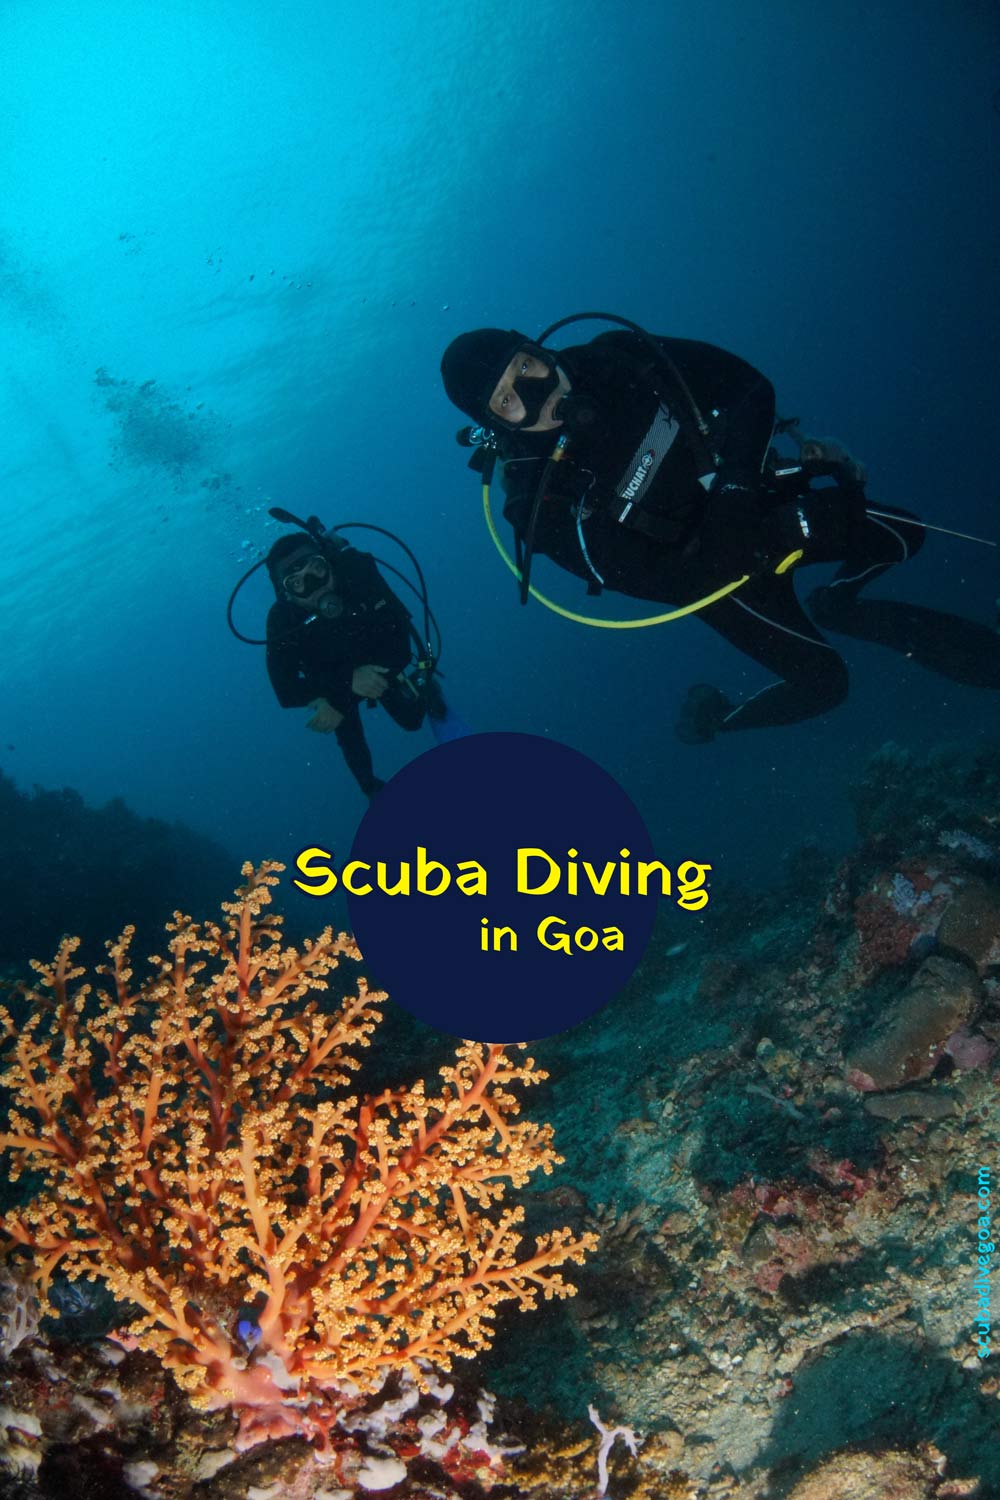 Experience Scuba Diving at Grand Island in Goa 7